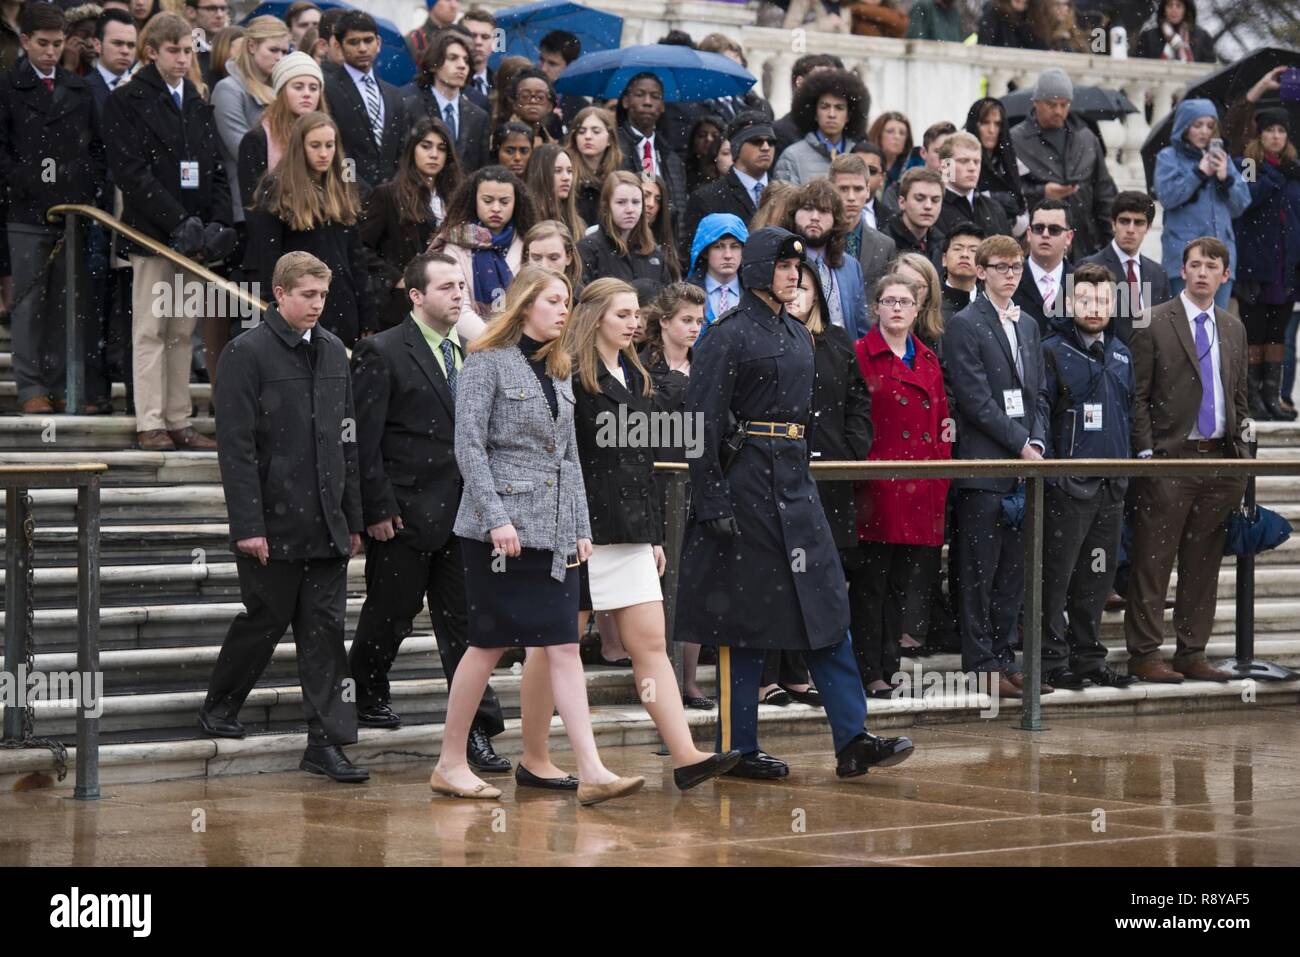 From the left, Andrew Pogue, from Missouri; Dakota Fleury, from Washington, D.C.; Marion Lovett, from New Hampshire; and Amanda Finnegan, from South Dakota; represent the high school students participating in the United States Senate Youth Program during a wreath laying ceremony at the Tomb of the Unknown Soldier in Arlington National Cemetery, March 10, 2017, in Arlington, Va. The students also toured the Memorial Amphitheater Display Room. Stock Photo